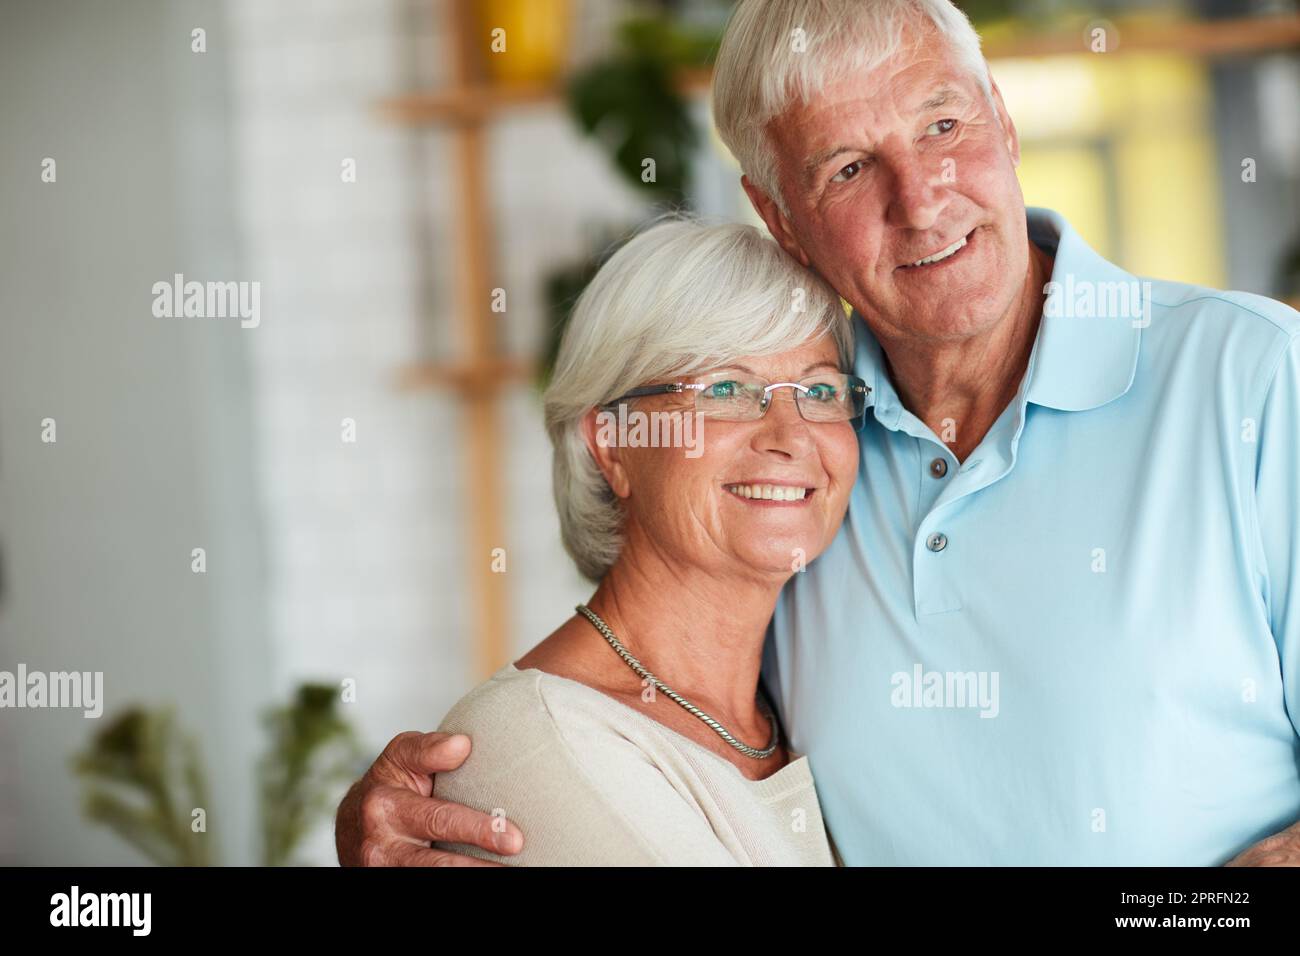 Theyve got a wonderful life. an affectionate senior couple in their local coffee shop. Stock Photo